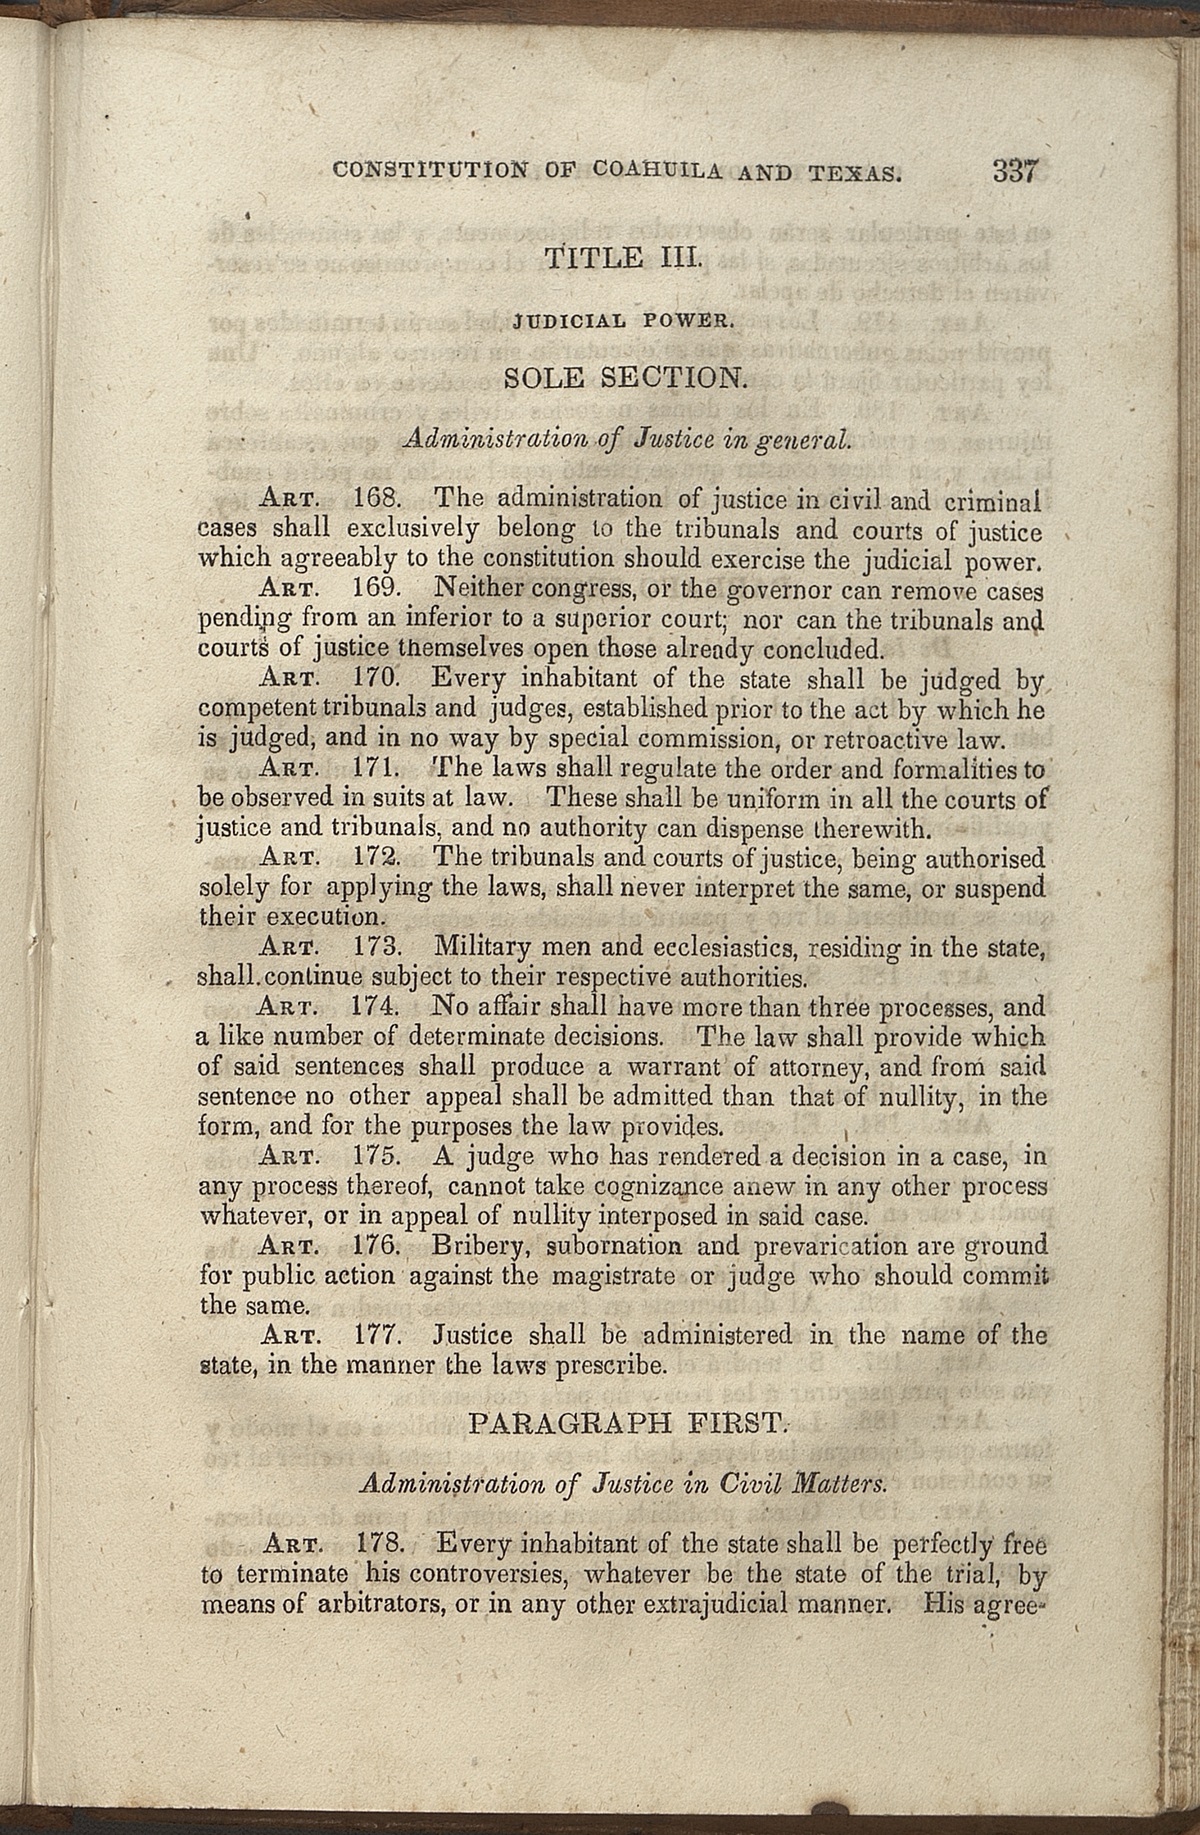 Title III, Sole Section, Articles 168-178